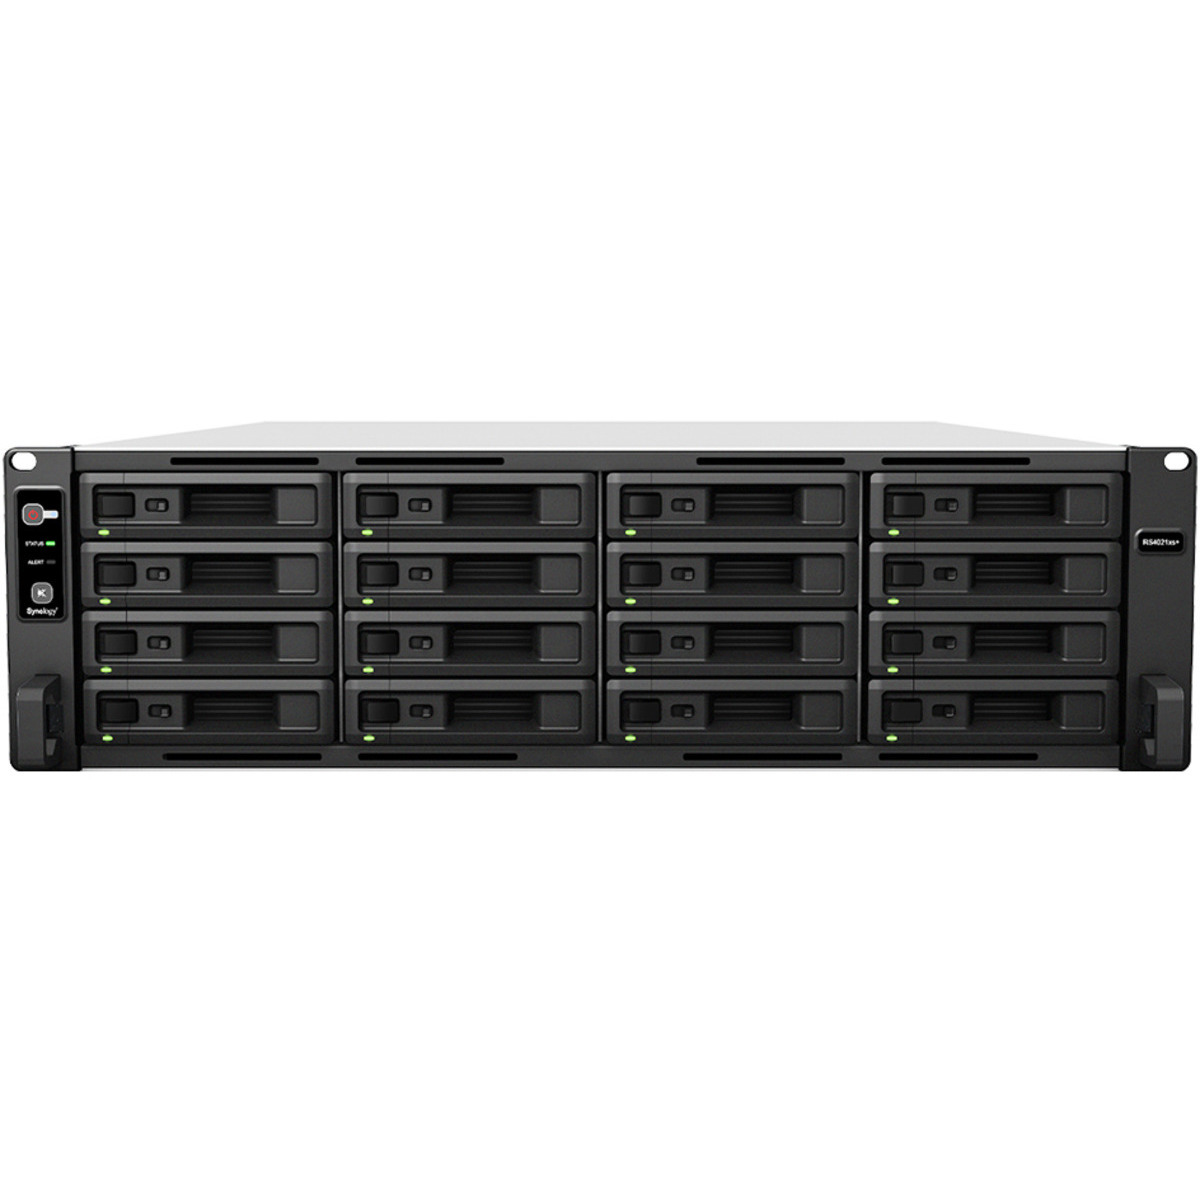 buy Synology RackStation RS4021xs+ 288tb RackMount NAS - Network Attached Storage Device 16x18000gb Seagate IronWolf Pro ST18000NT001 3.5 7200rpm SATA 6Gb/s HDD NAS Class Drives Installed - Burn-In Tested - nas headquarters buy network attached storage server device das new raid-5 free shipping simply usa christmas holiday black friday cyber monday week sale happening now! RackStation RS4021xs+